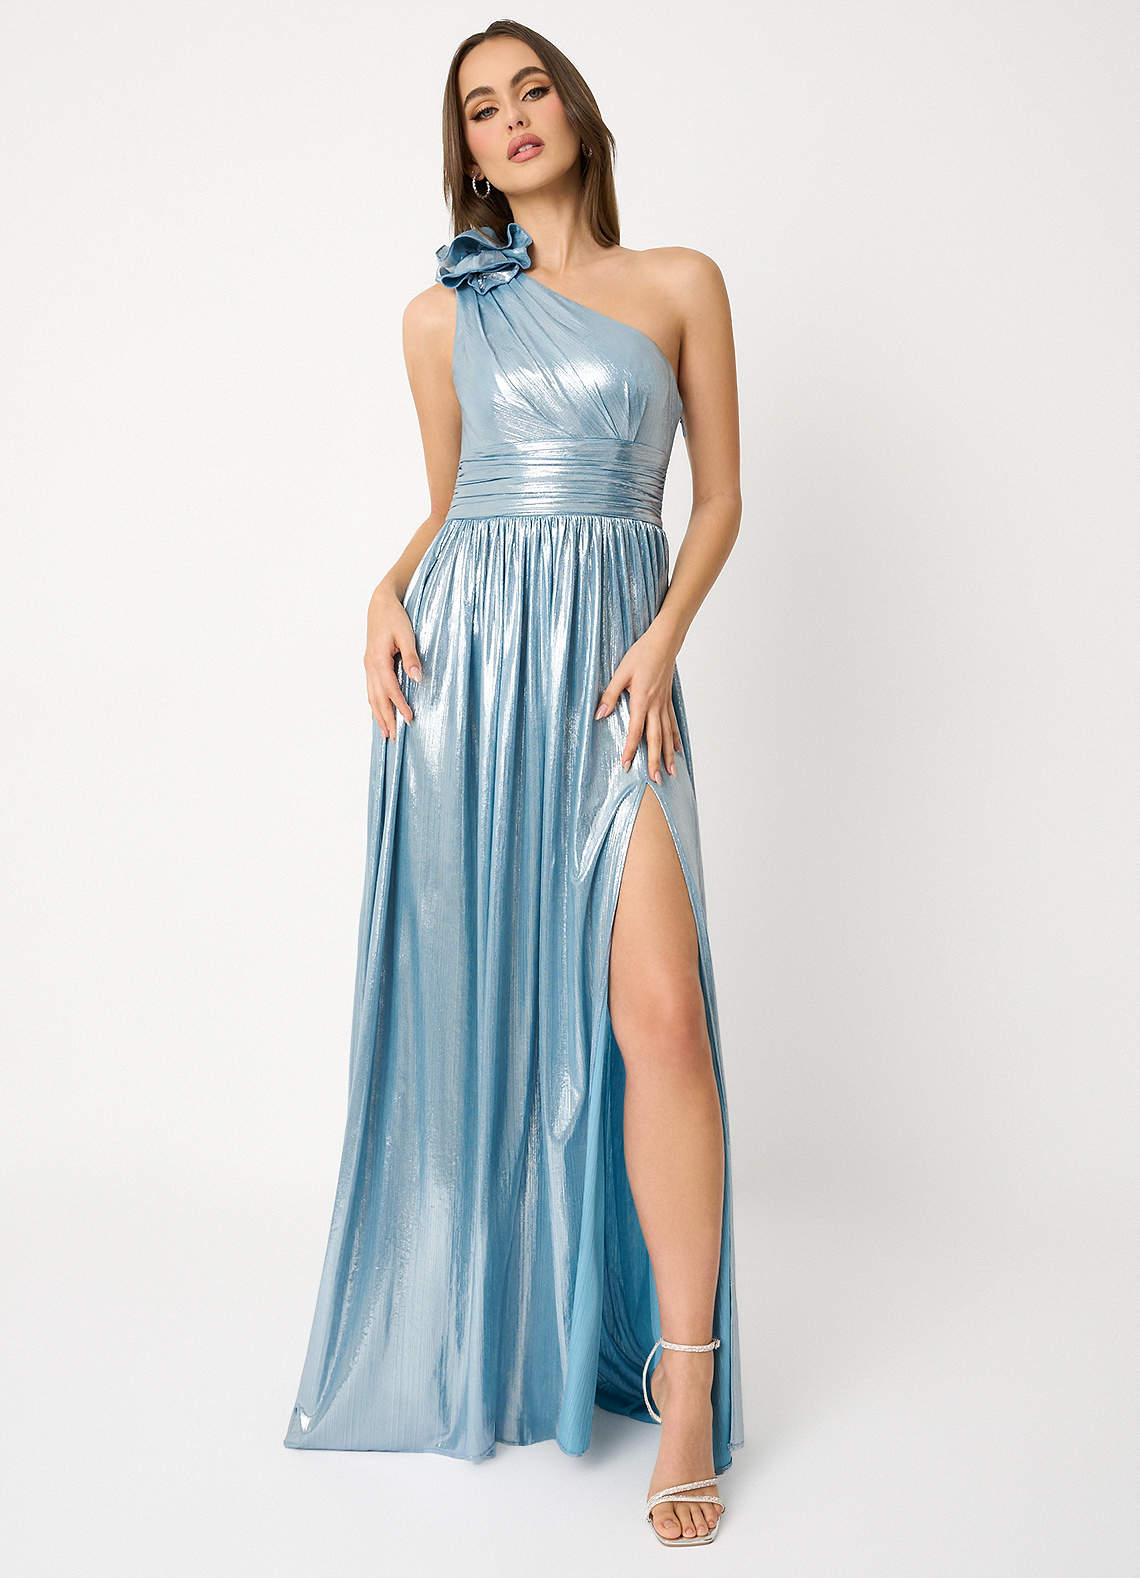 Ivy Aqua Blue Pleated Gown image2